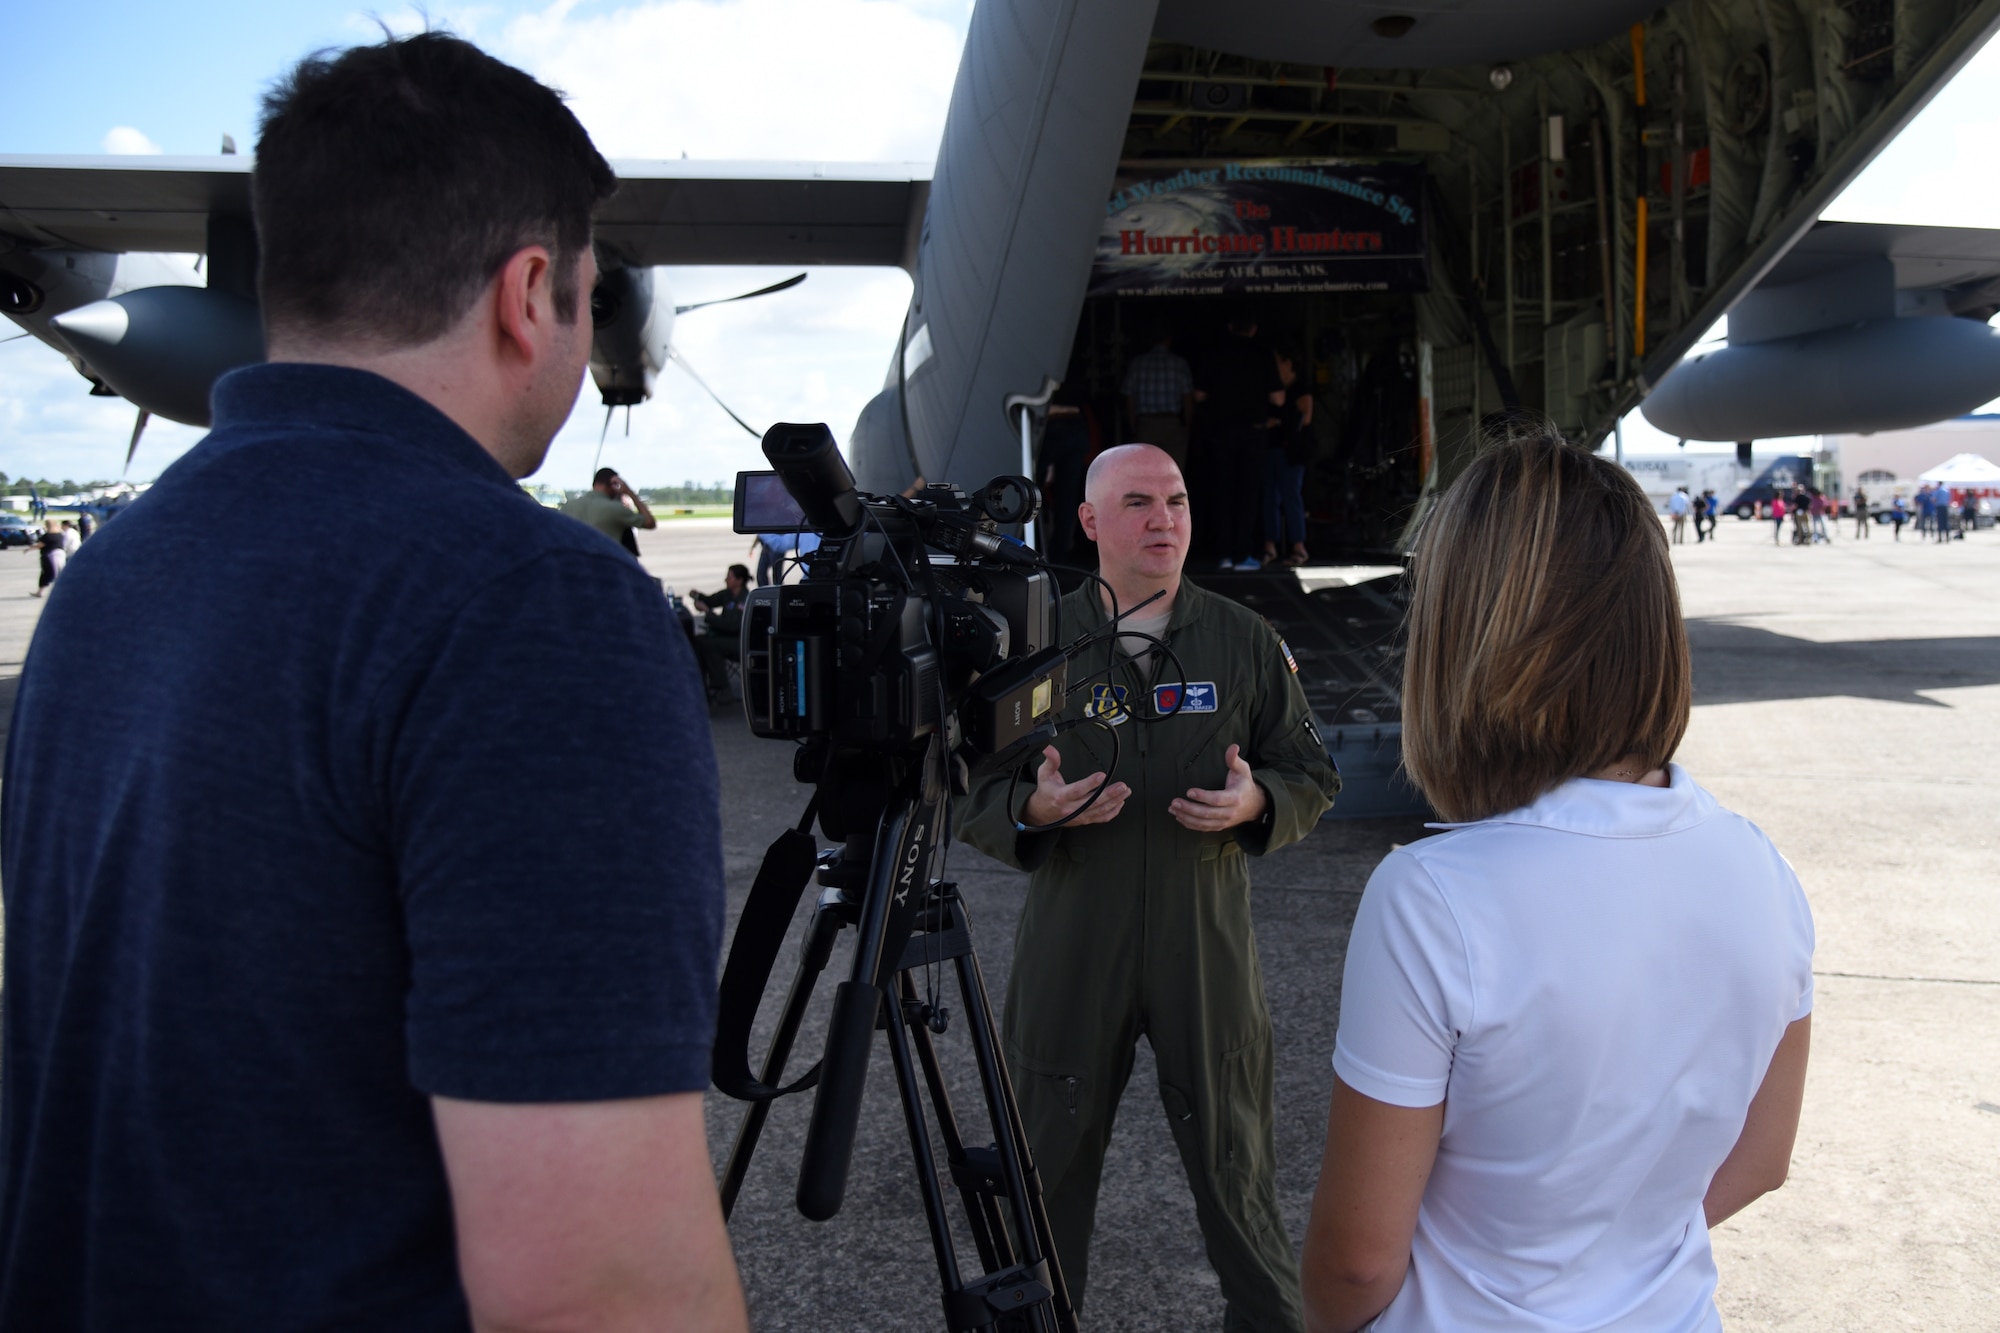 Maj. Tobi Baker, 53rd Weather Reconnaissance Squadron aerial reconnaissance weather officer, talks about his duties and responsibilities as an ARWO during an interview May 10, 2019, in Brunswick, Georgia. Media interviews were conducted during the Hurricane Awareness Tour to help create a weather-ready nation by raising awareness for the upcoming hurricane season occurring June 1-Nov. 30, with emphasis this year on raising awareness about inland flooding. (U.S. Air Force photo by Tech. Sgt. Christopher Carranza)